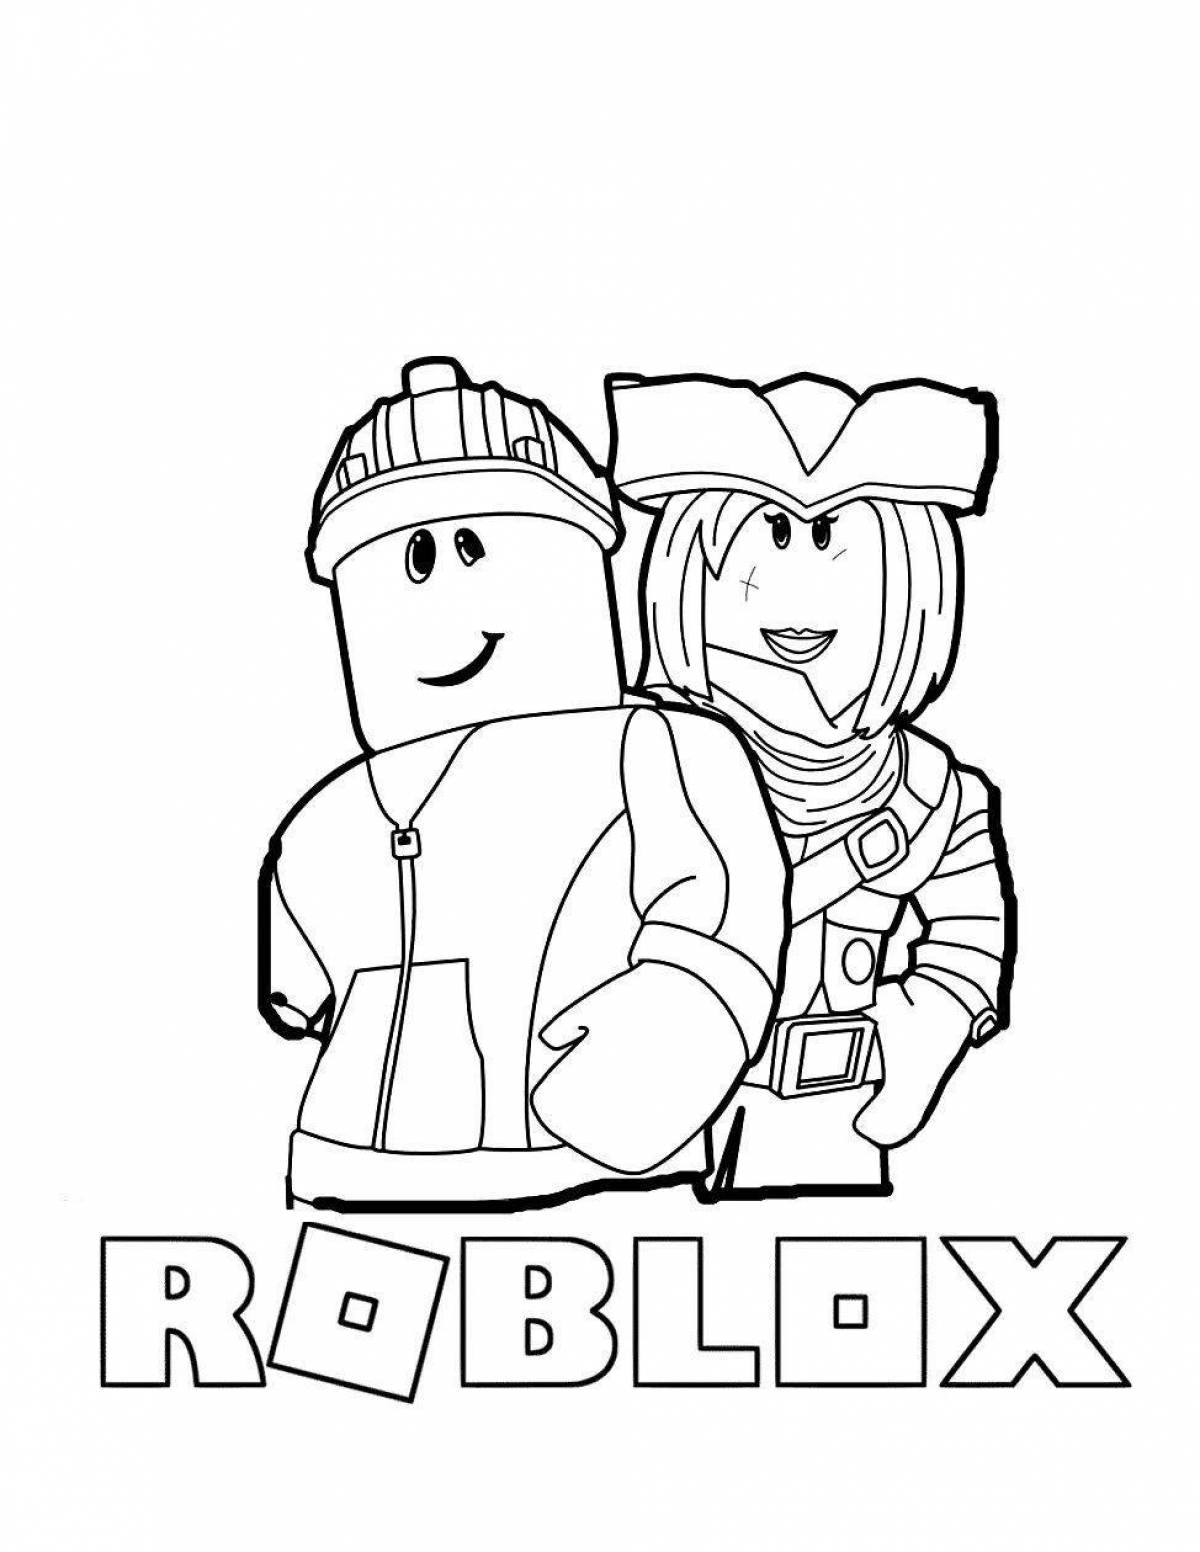 Robloxers cute coloring pages